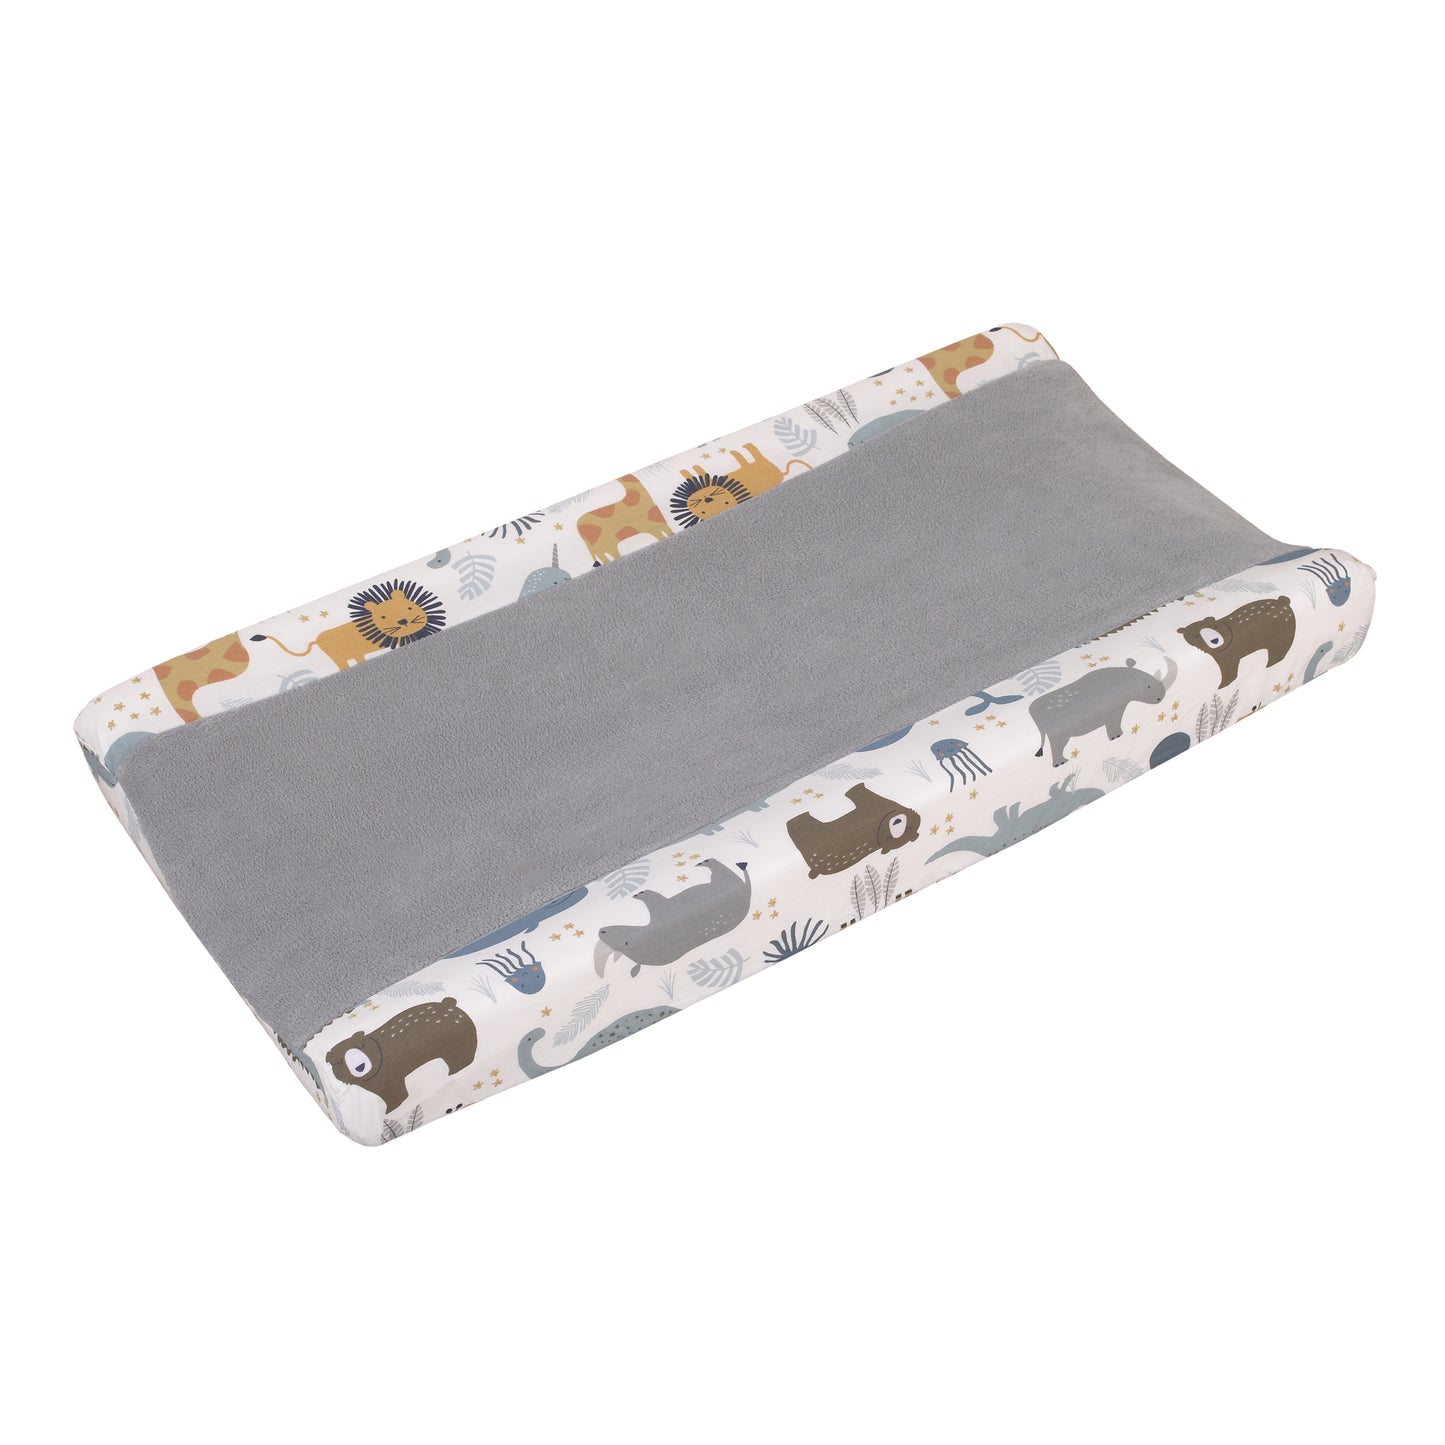 NoJo Zoo Animals Super Soft Changing Pad Cover